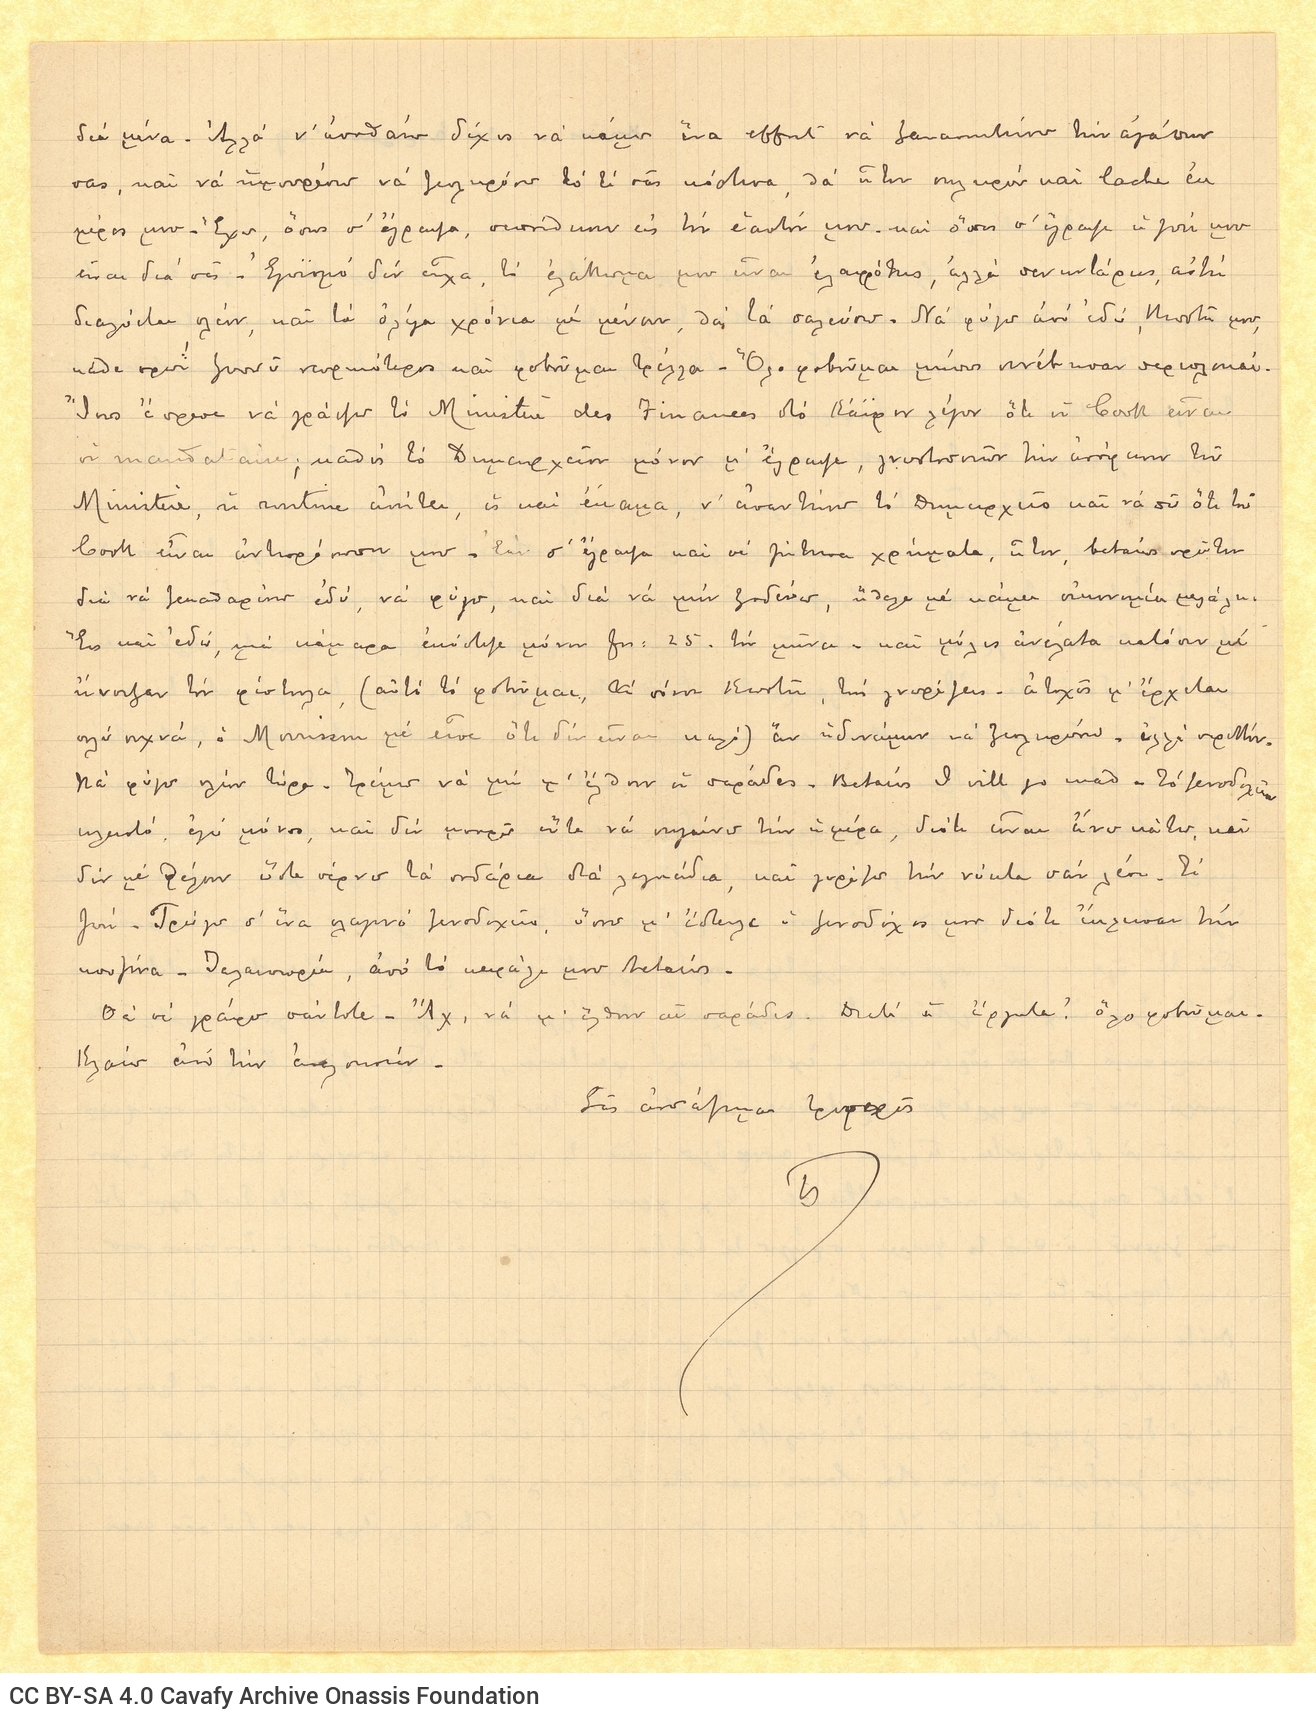 Handwritten letter by Paul Cavafy to C. P. Cavafy from Hyères, France, on both sides of a sheet. Paul mentions that he has r